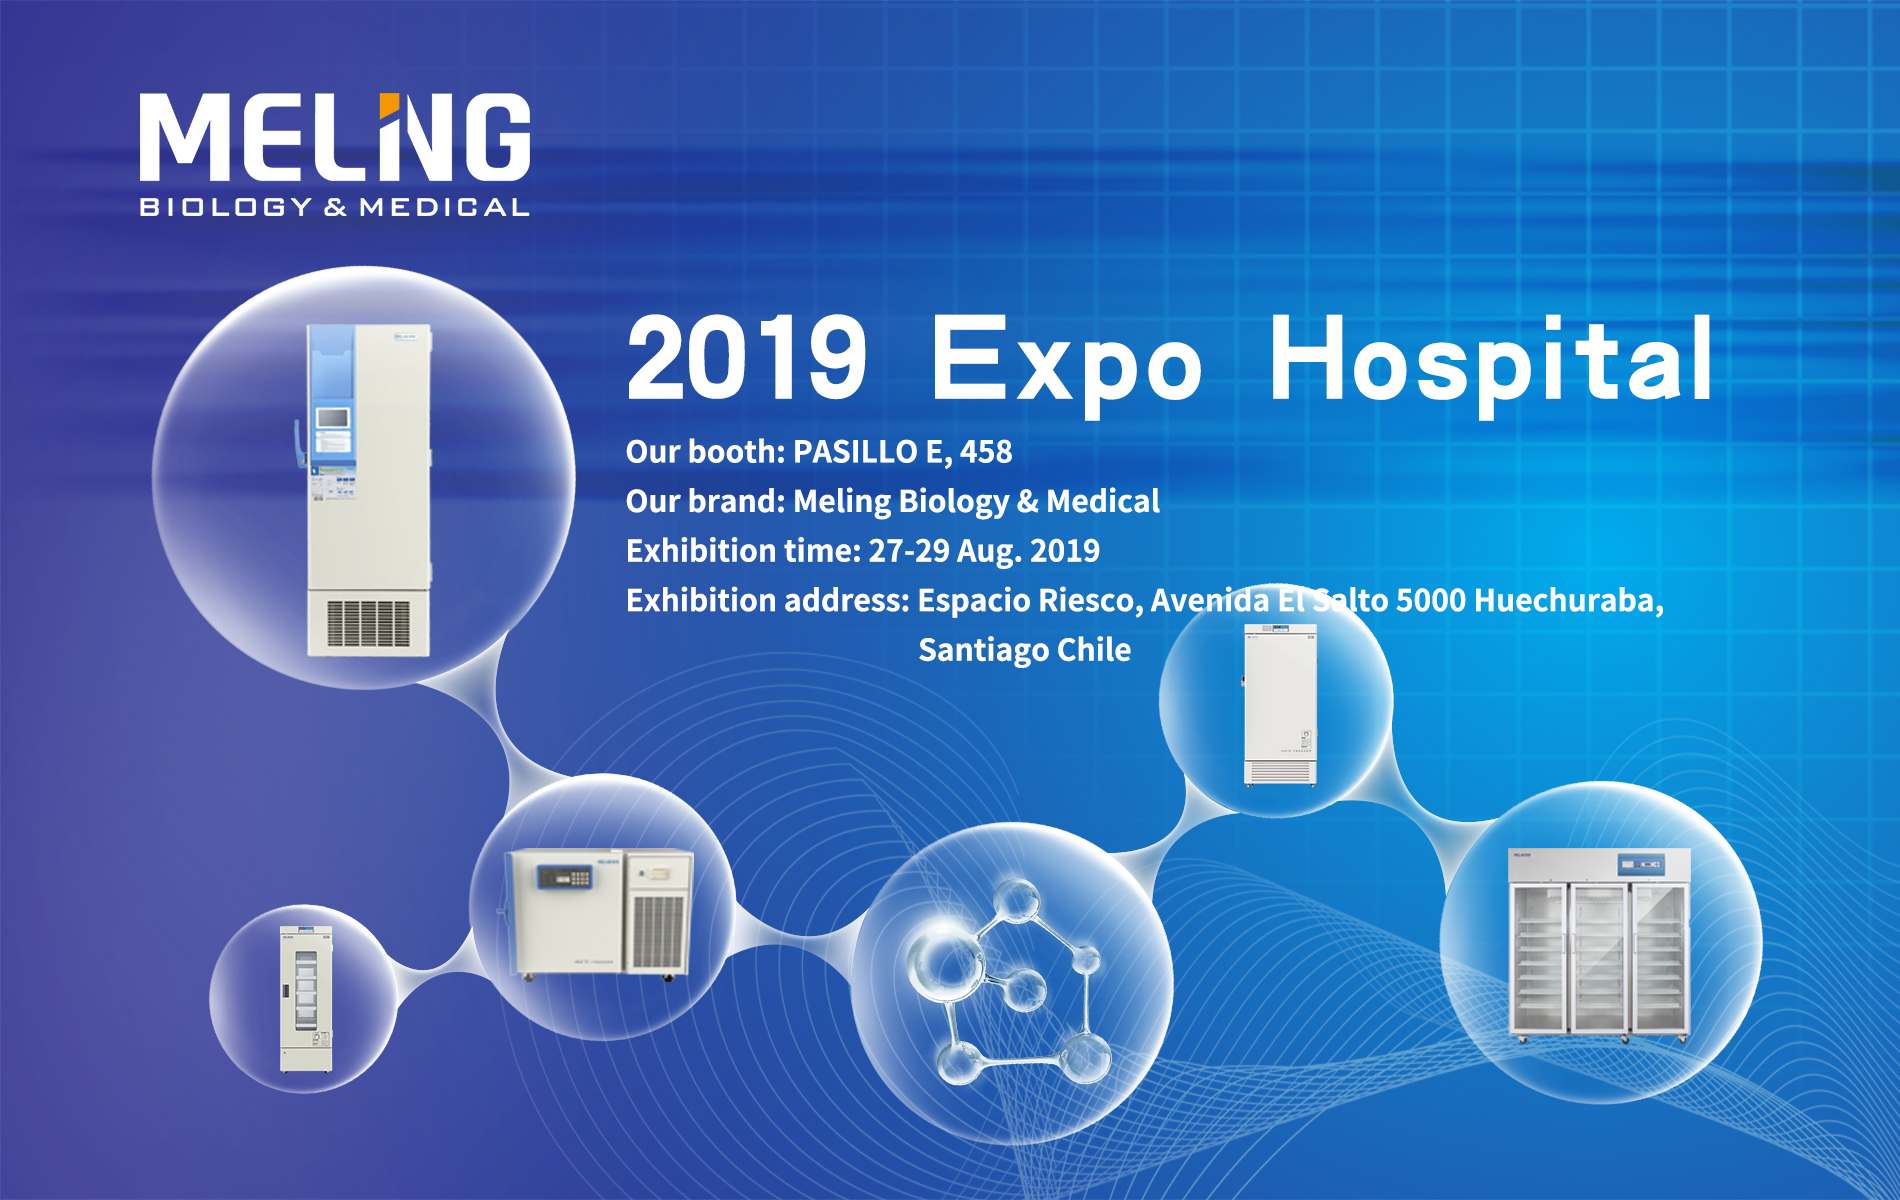 2019 EXPO HOSPITAL is Coming